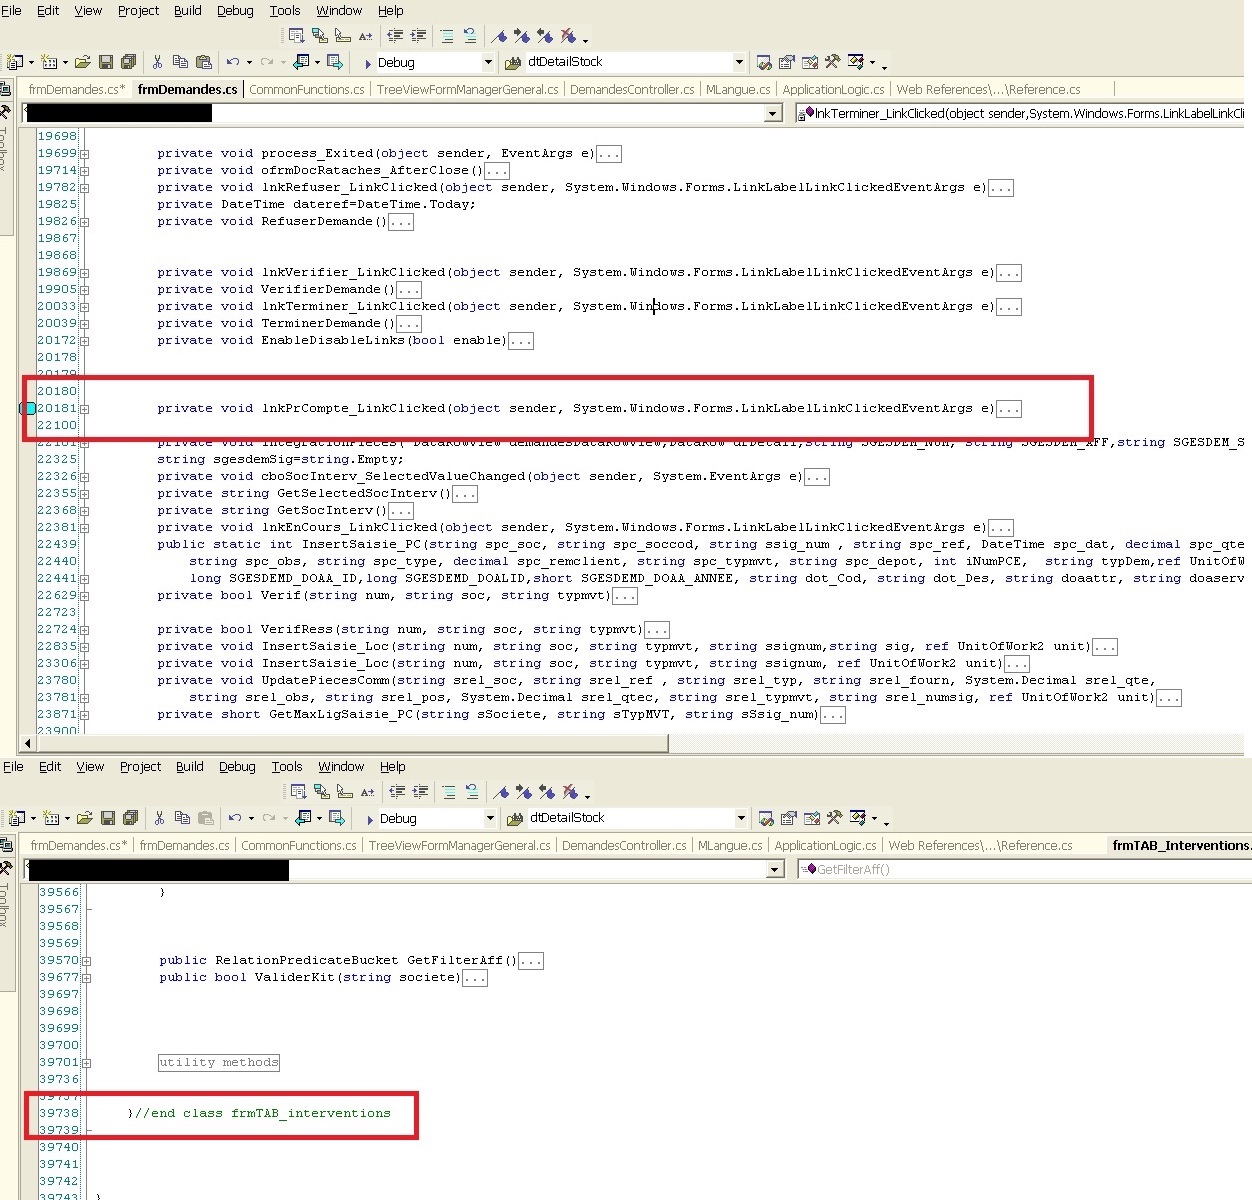 A screengrab of Visual Studio 2003, showing the method lnkPrCompte_LinkClicked is over 2,000 lines in a 39,000 line file